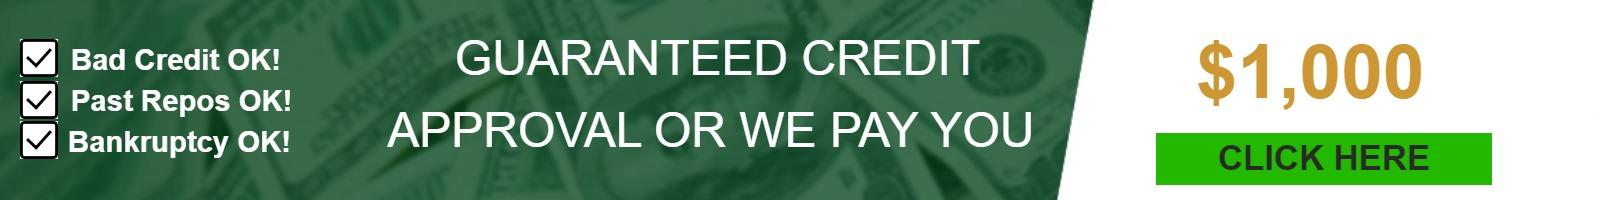 GUARANTEED CREDIT APPROVAL OR WE PAY YOU $1,000